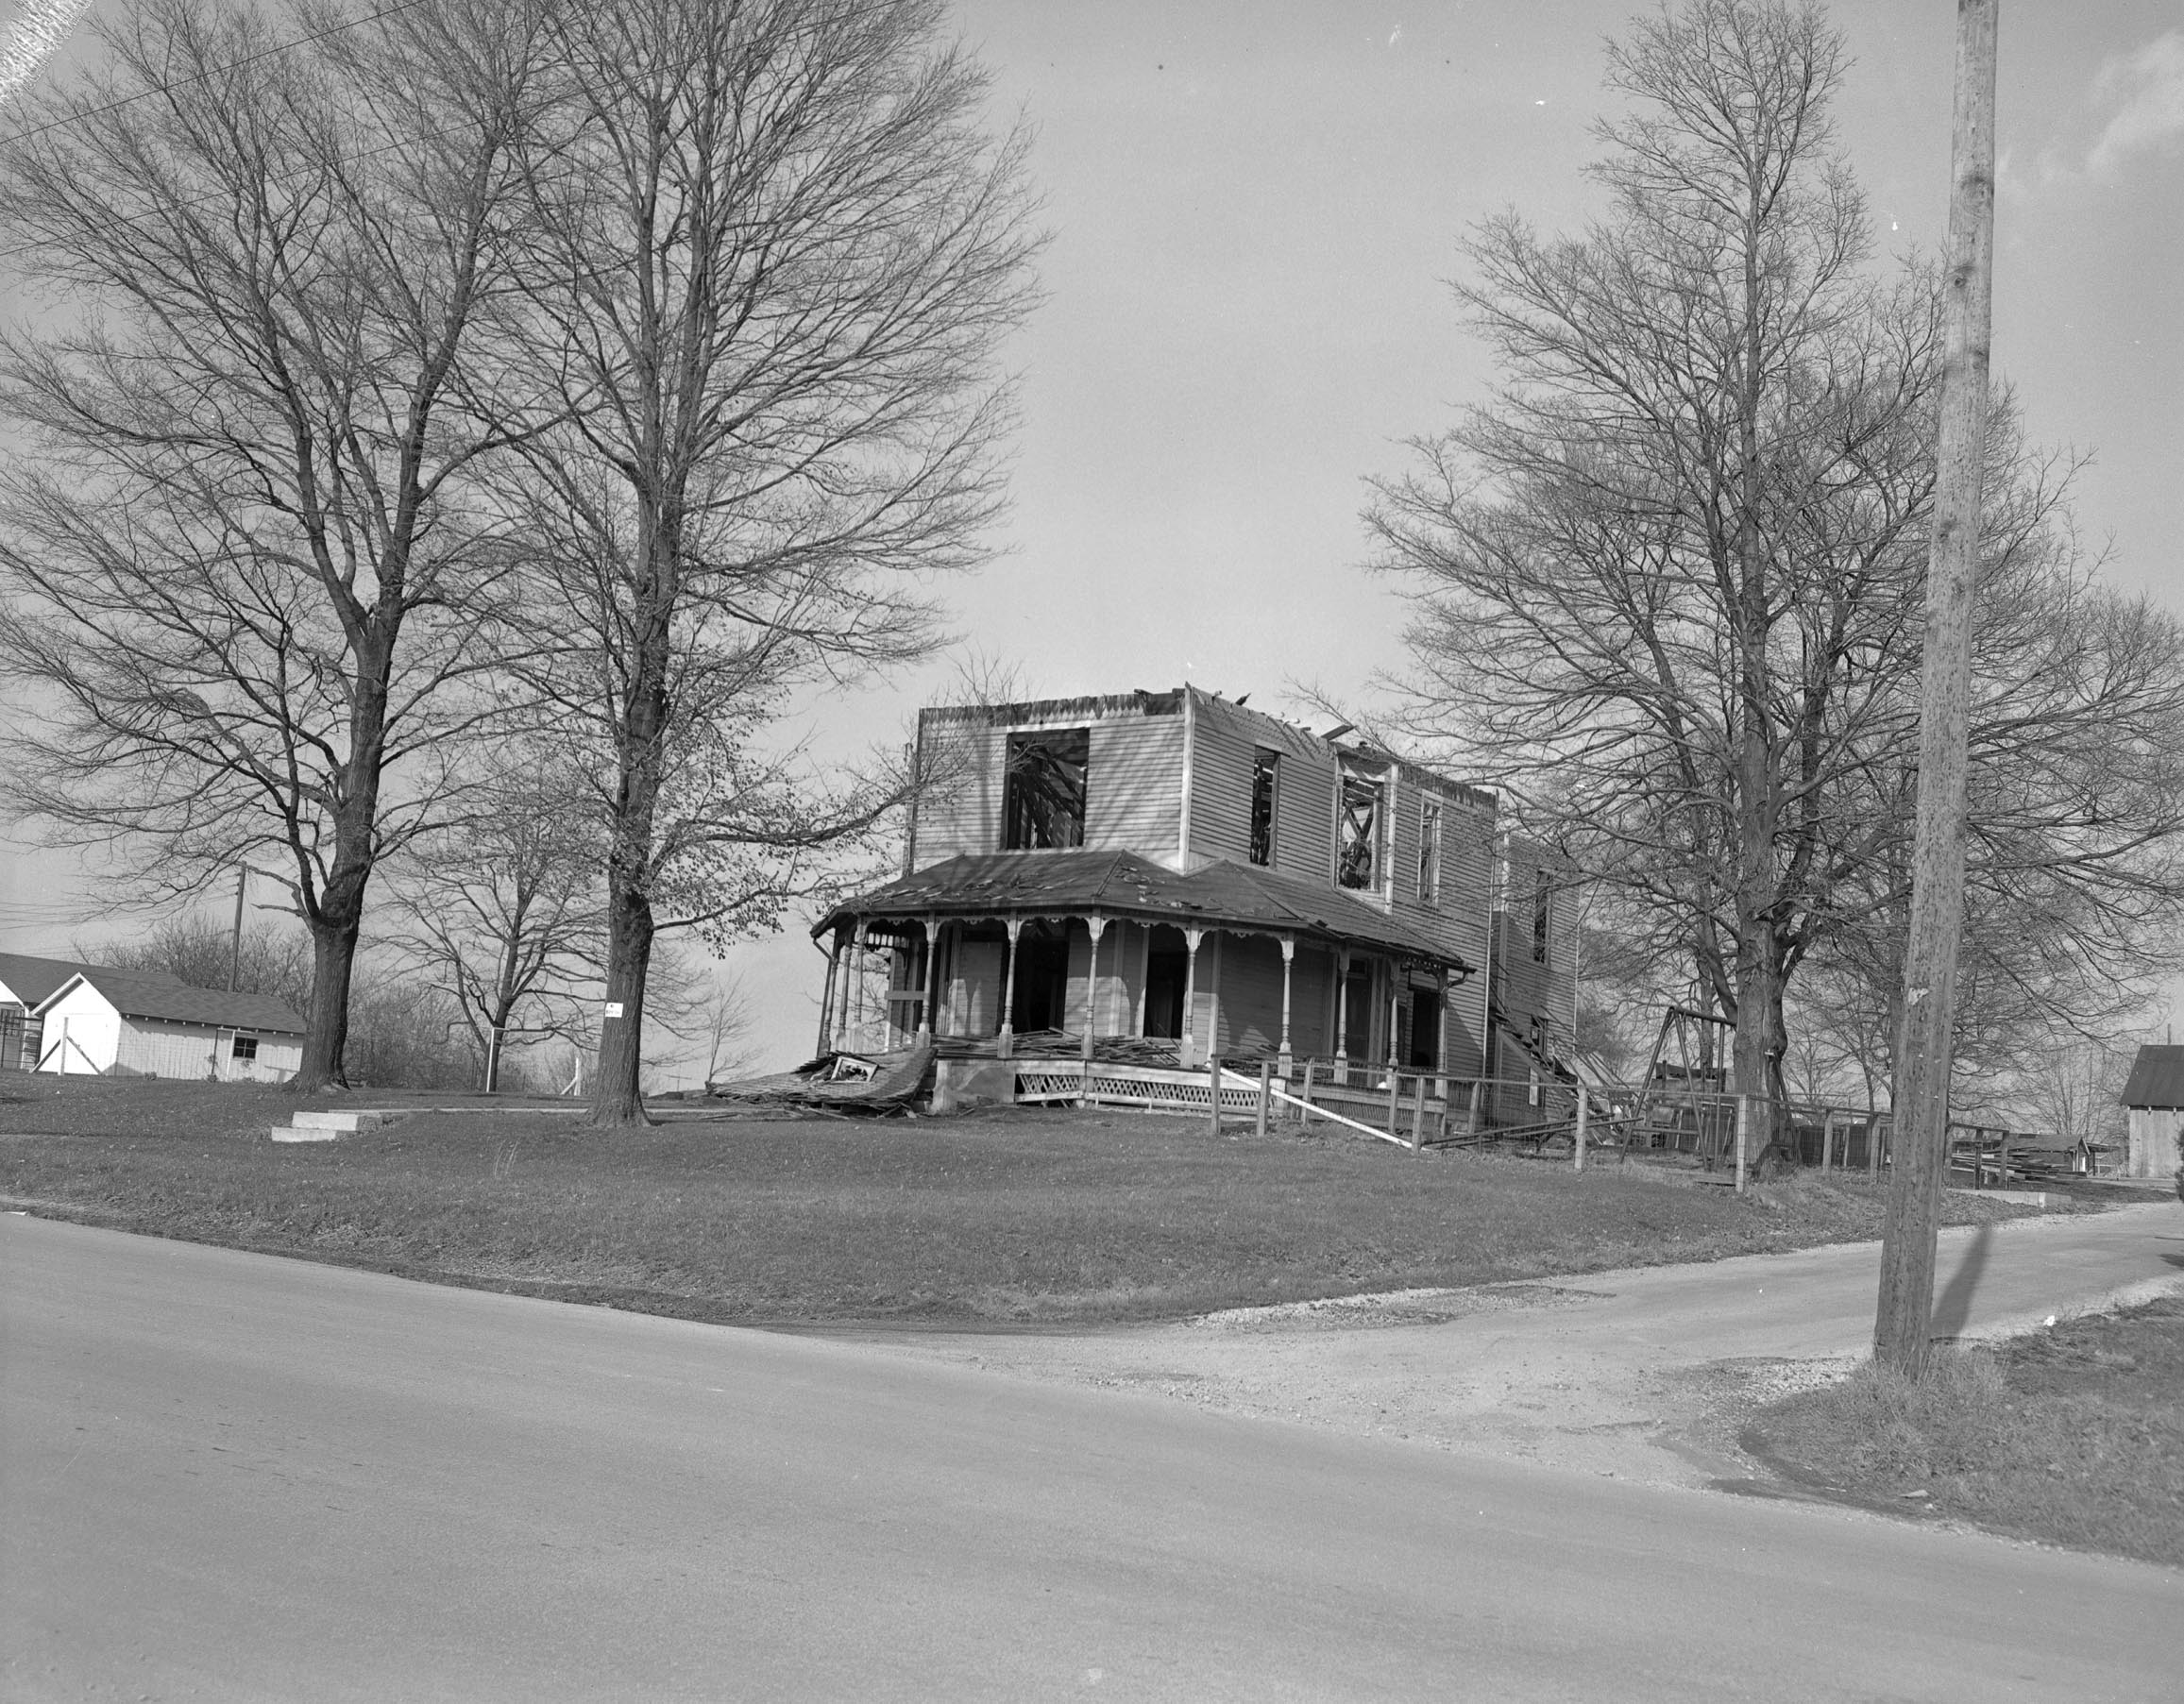 The "Pest House" facing dismantling in 1957